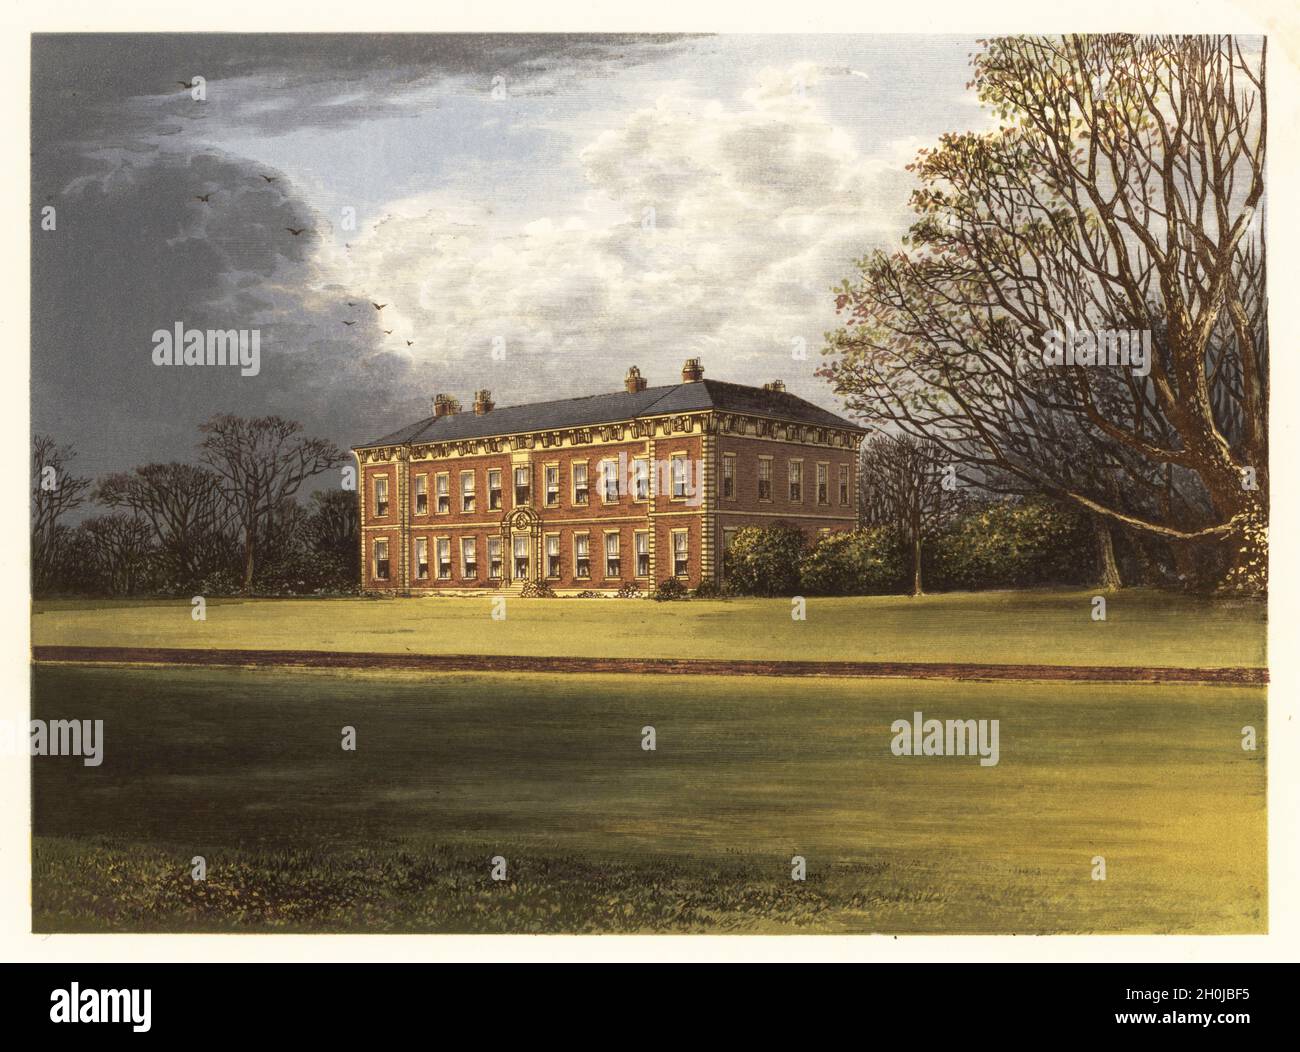 Beningbrough Hall, Yorkshire, England. Georgian mansion built  by William Thornton in 1716 for John Bourchier, possibly designed by architect Thomas Archer. Colour woodblock by Benjamin Fawcett in the Baxter process of an illustration by Alexander Francis Lydon from Reverend Francis Orpen Morris’s Picturesque Views of the Seats of Noblemen and Gentlemen of Great Britain and Ireland, William Mackenzie, London, 1880. Stock Photo